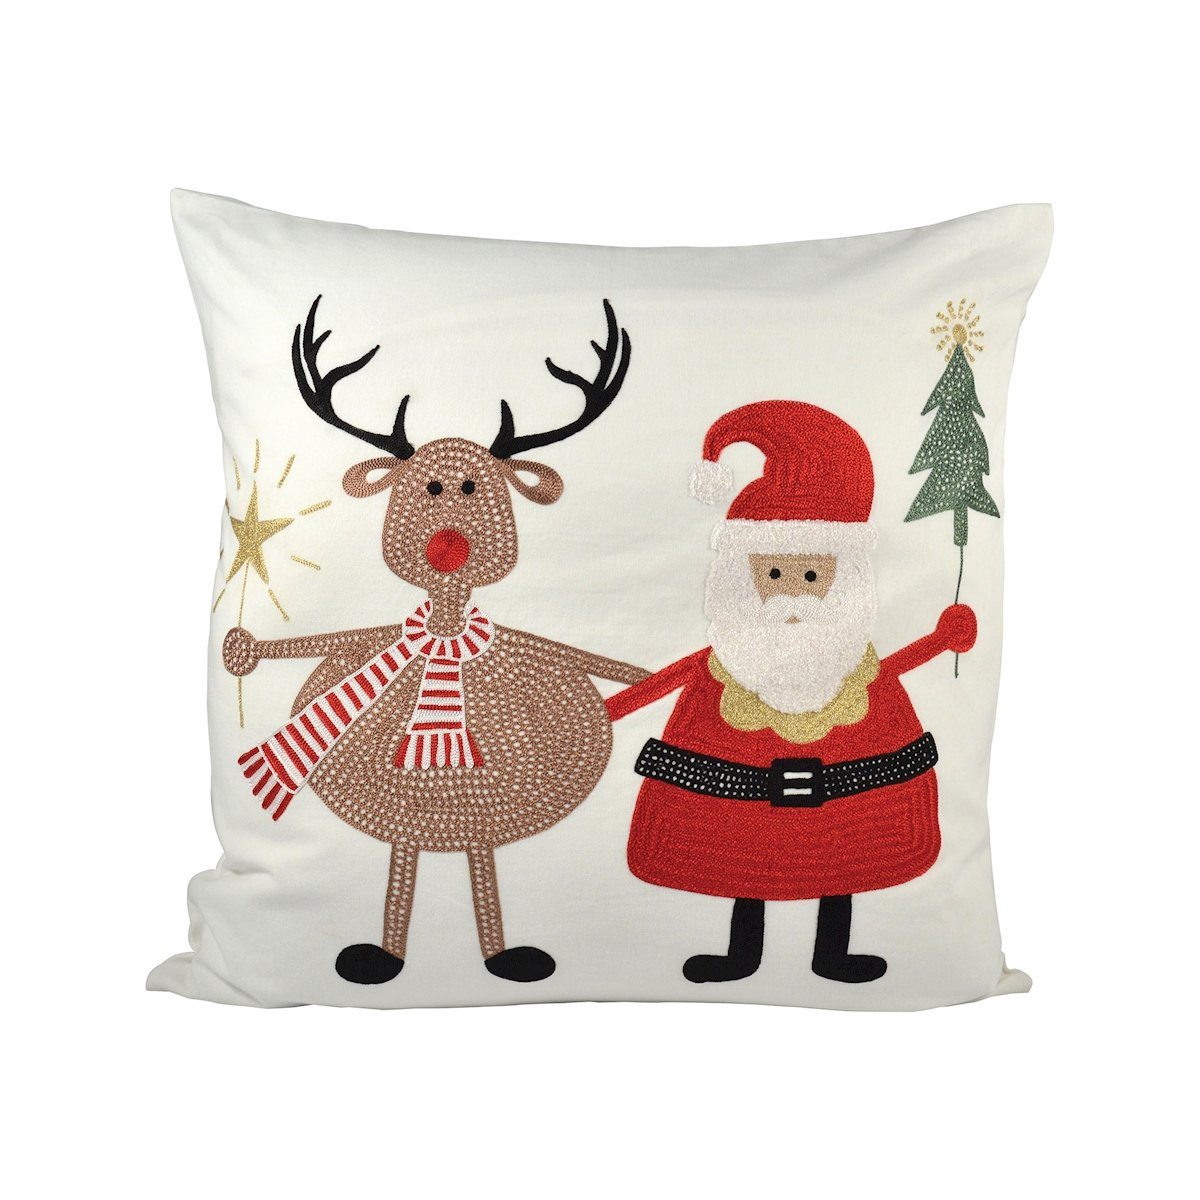 Santa And Friends 20x20 Pillow Accessories Pomeroy 